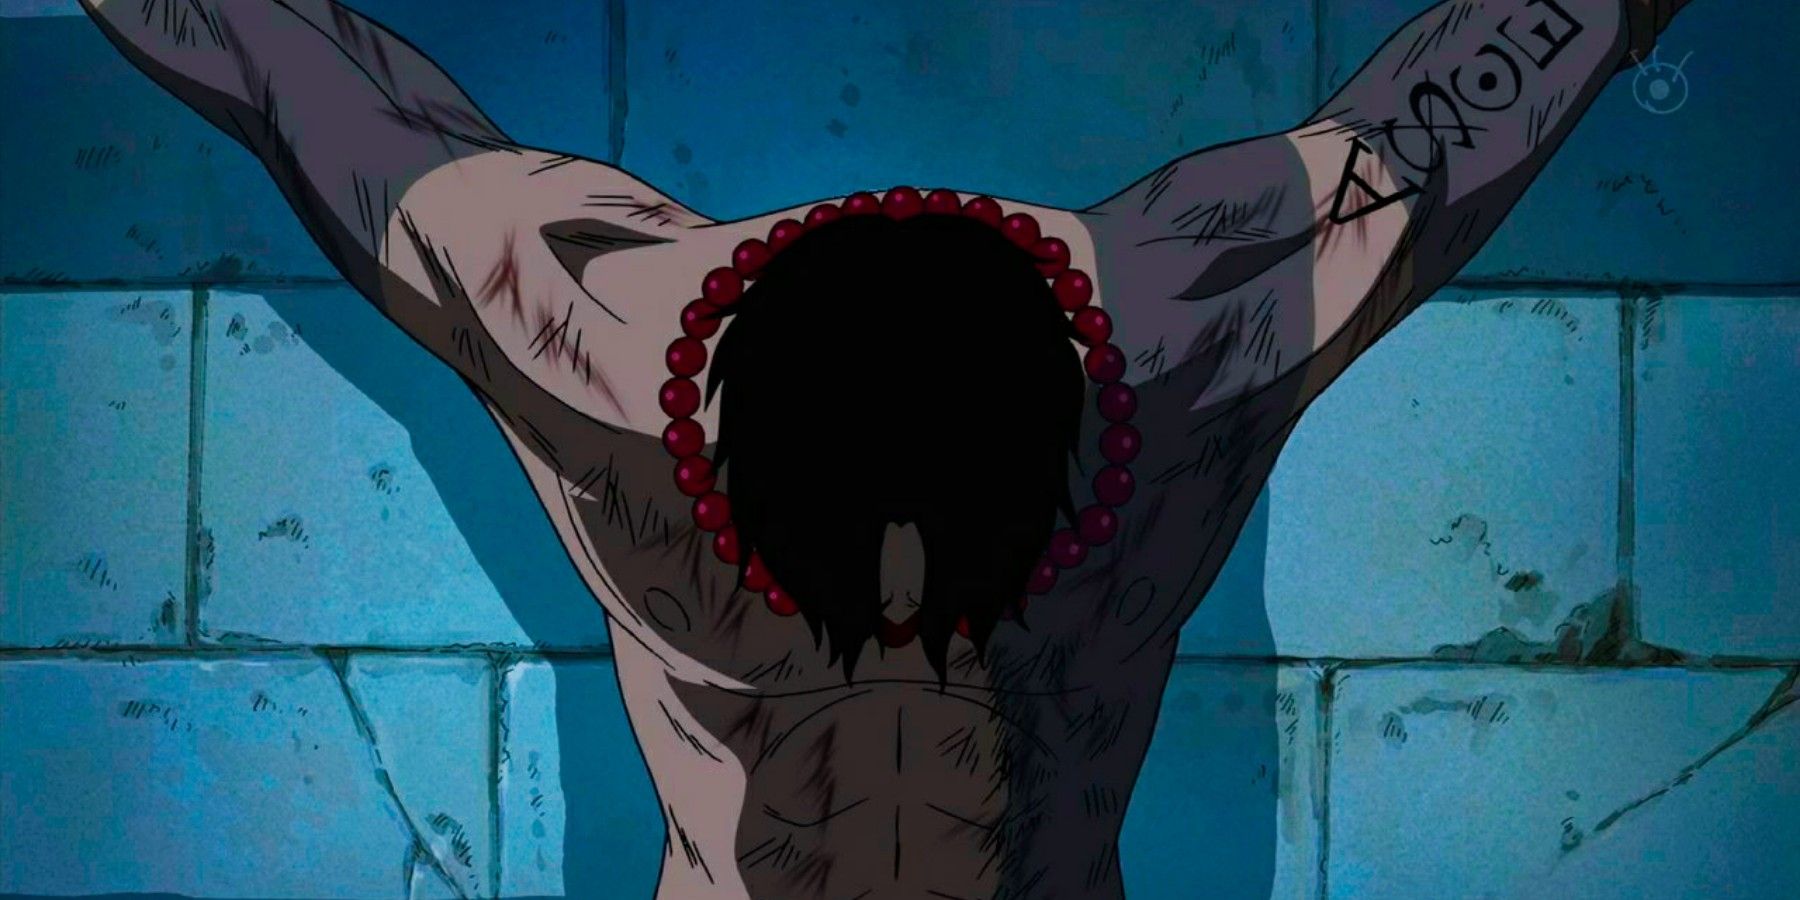 Portgas D. Ace In Impel Down